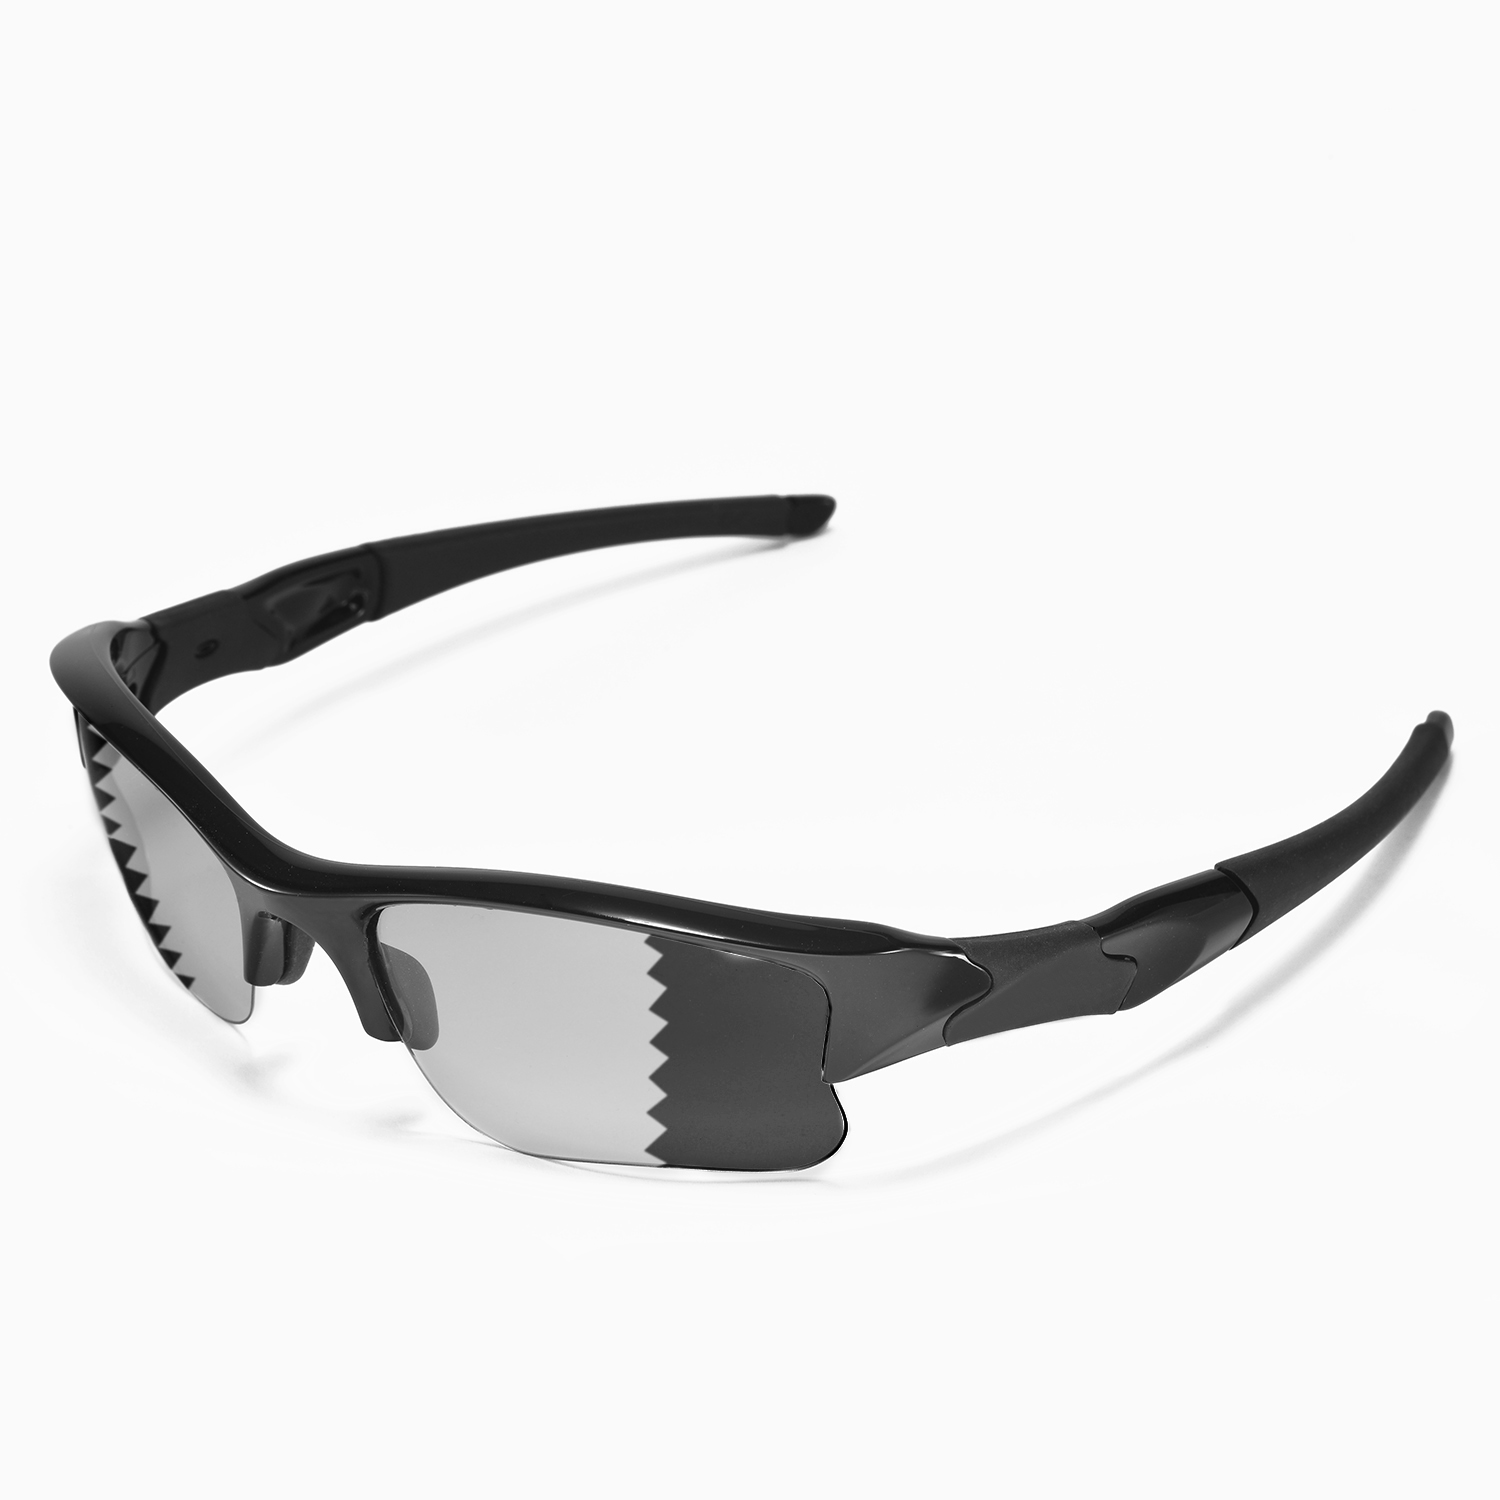 Are reviews of Transition lenses generally positive?